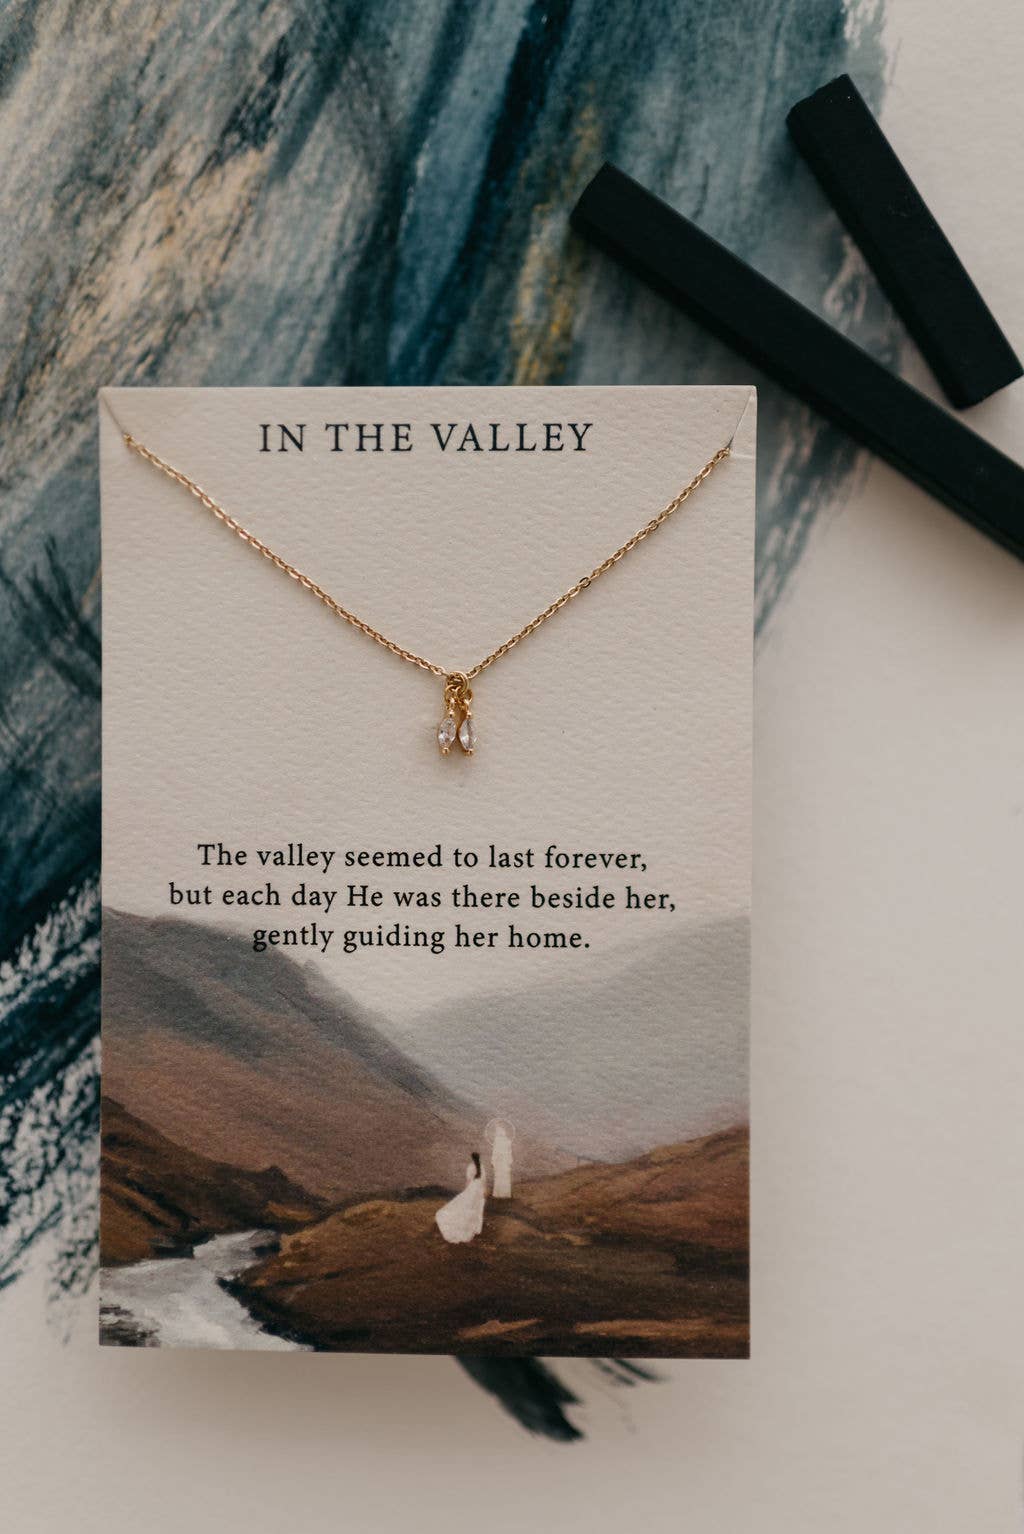 Dear Heart - In the Valley | Christian Necklace Gift | Psalm 23:4